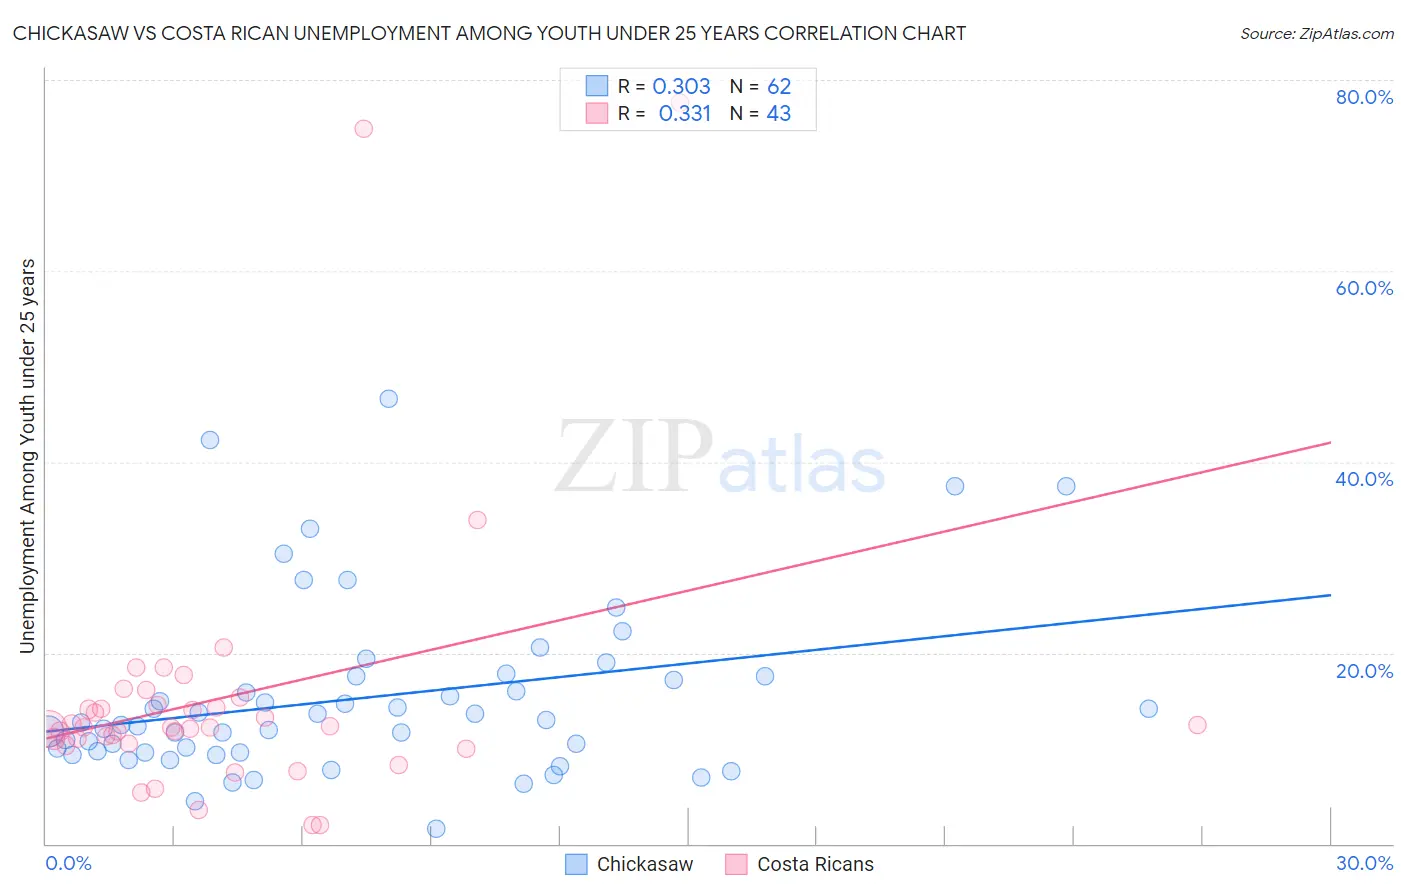 Chickasaw vs Costa Rican Unemployment Among Youth under 25 years